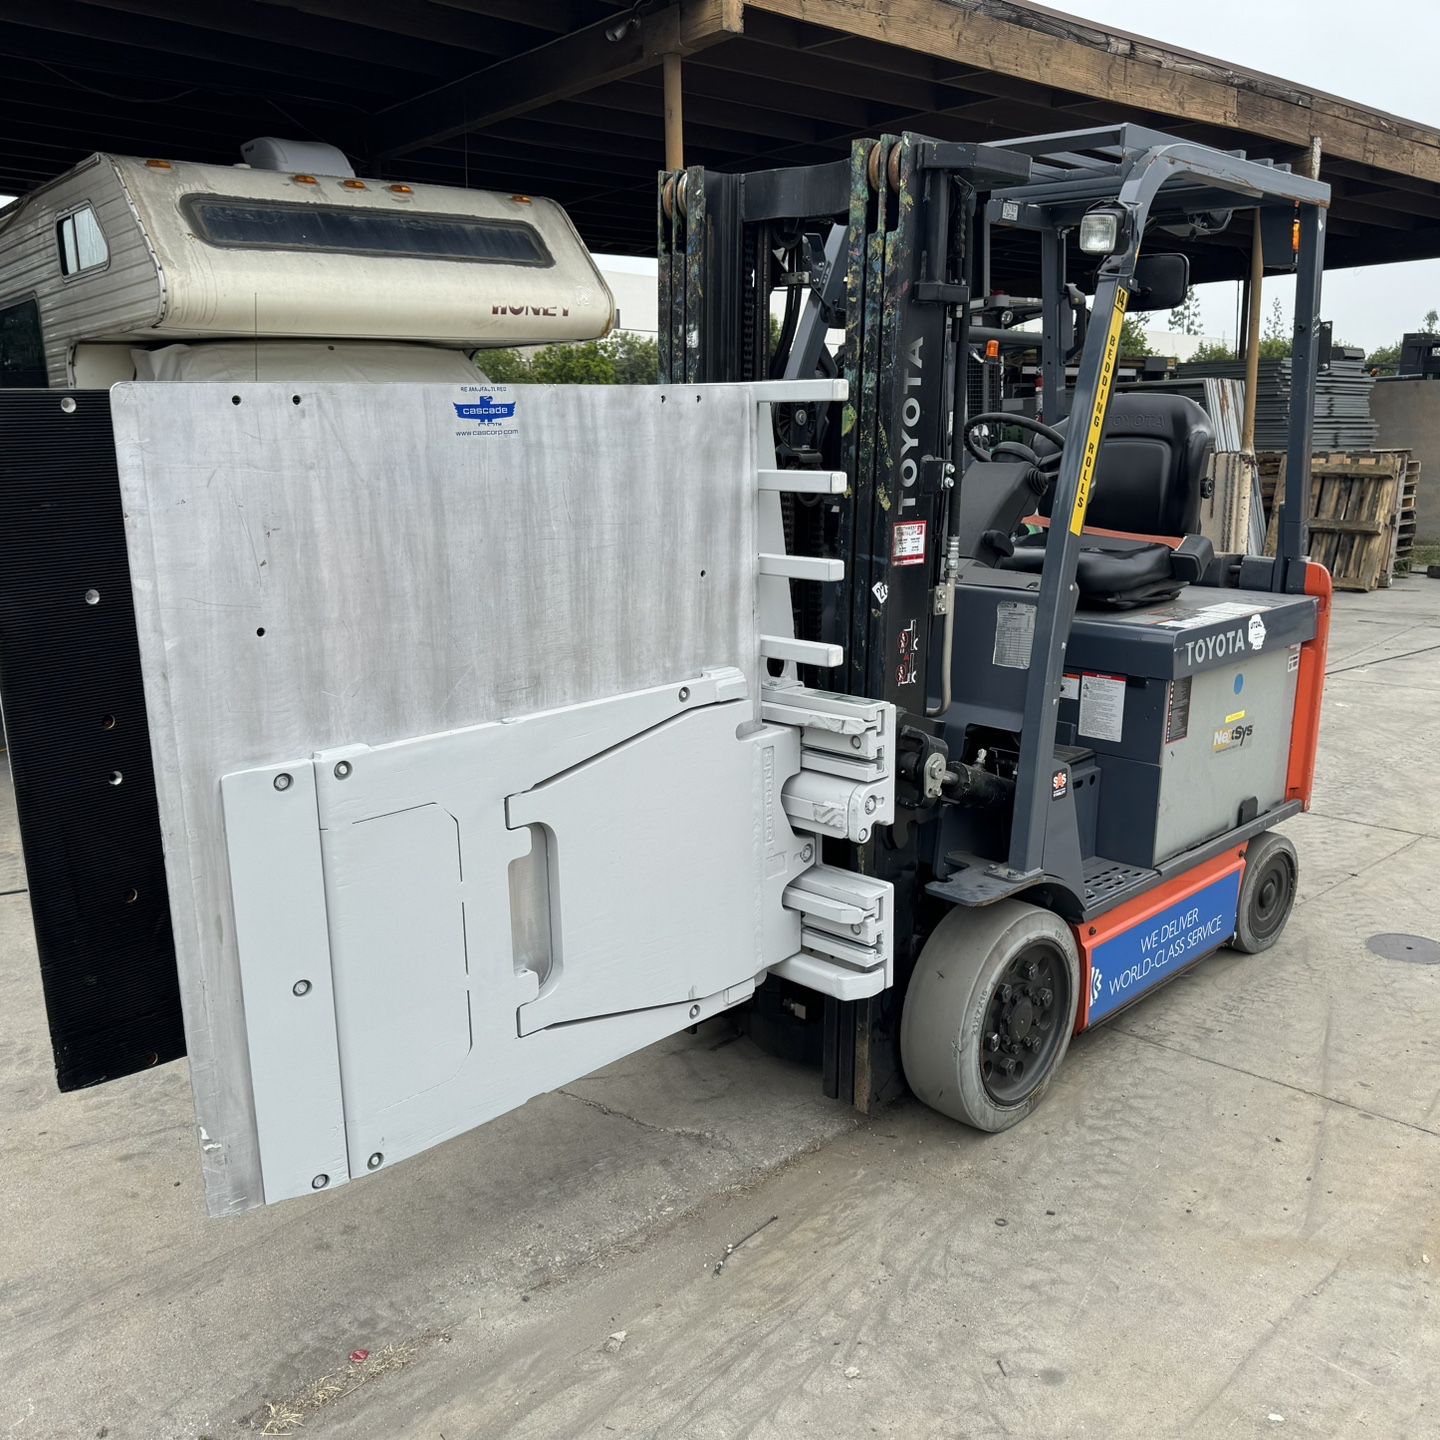 2019 Toyota forklift clamp